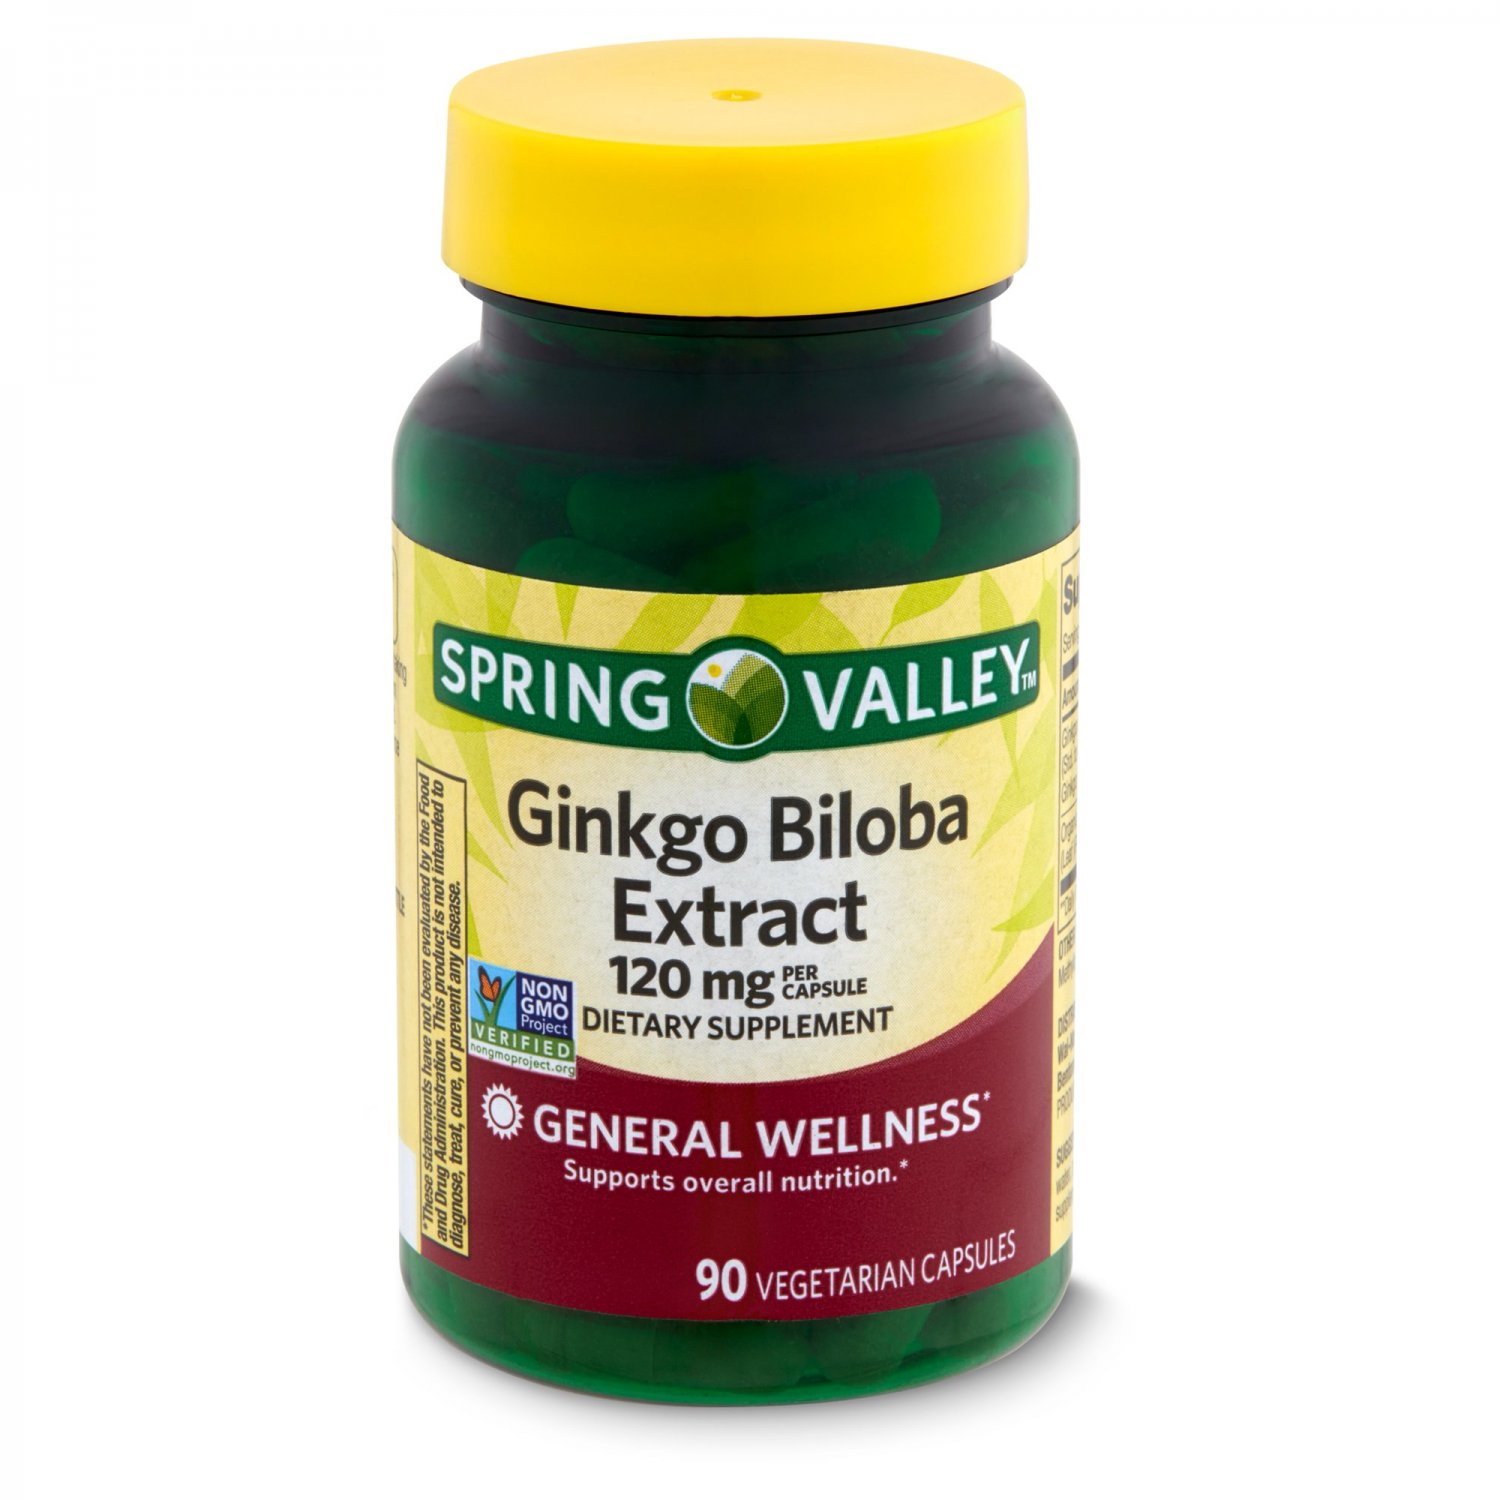 Spring Valley Ginkgo Biloba Extract Dietary Supplement 120mg 90 Vegetarian Capsules